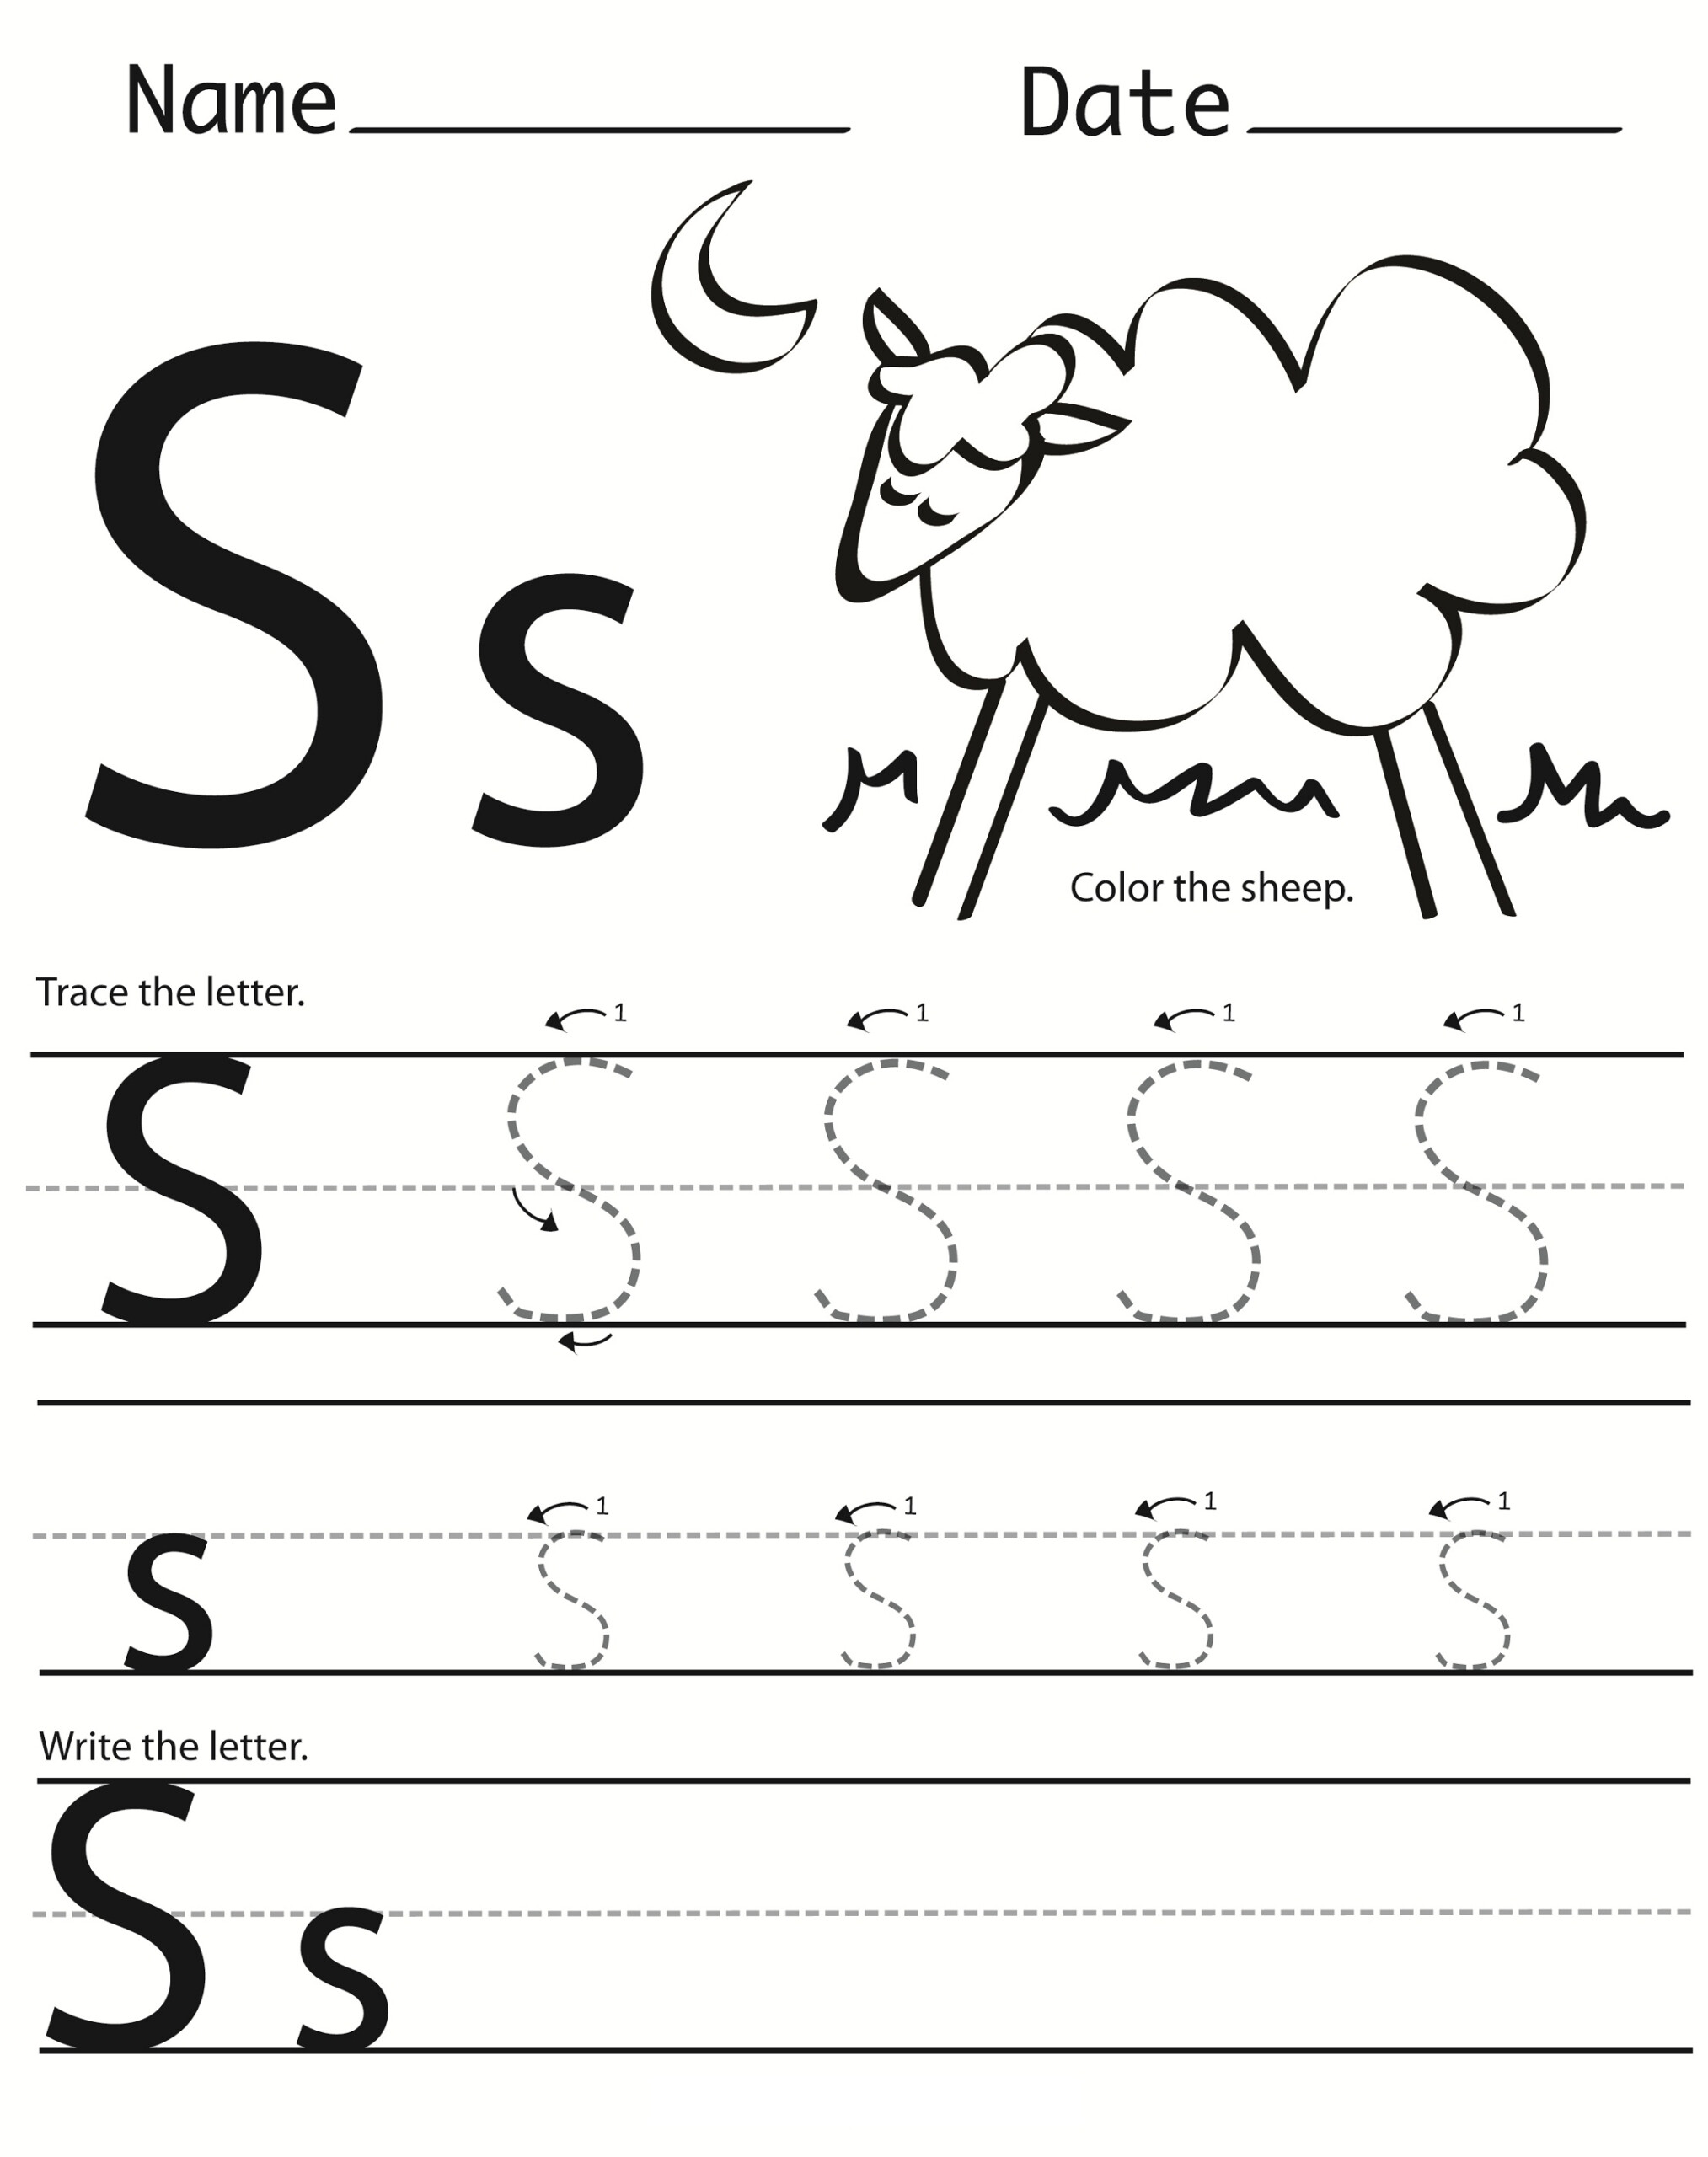 Trace Letter S | Kids Activities for Tracing Letters S